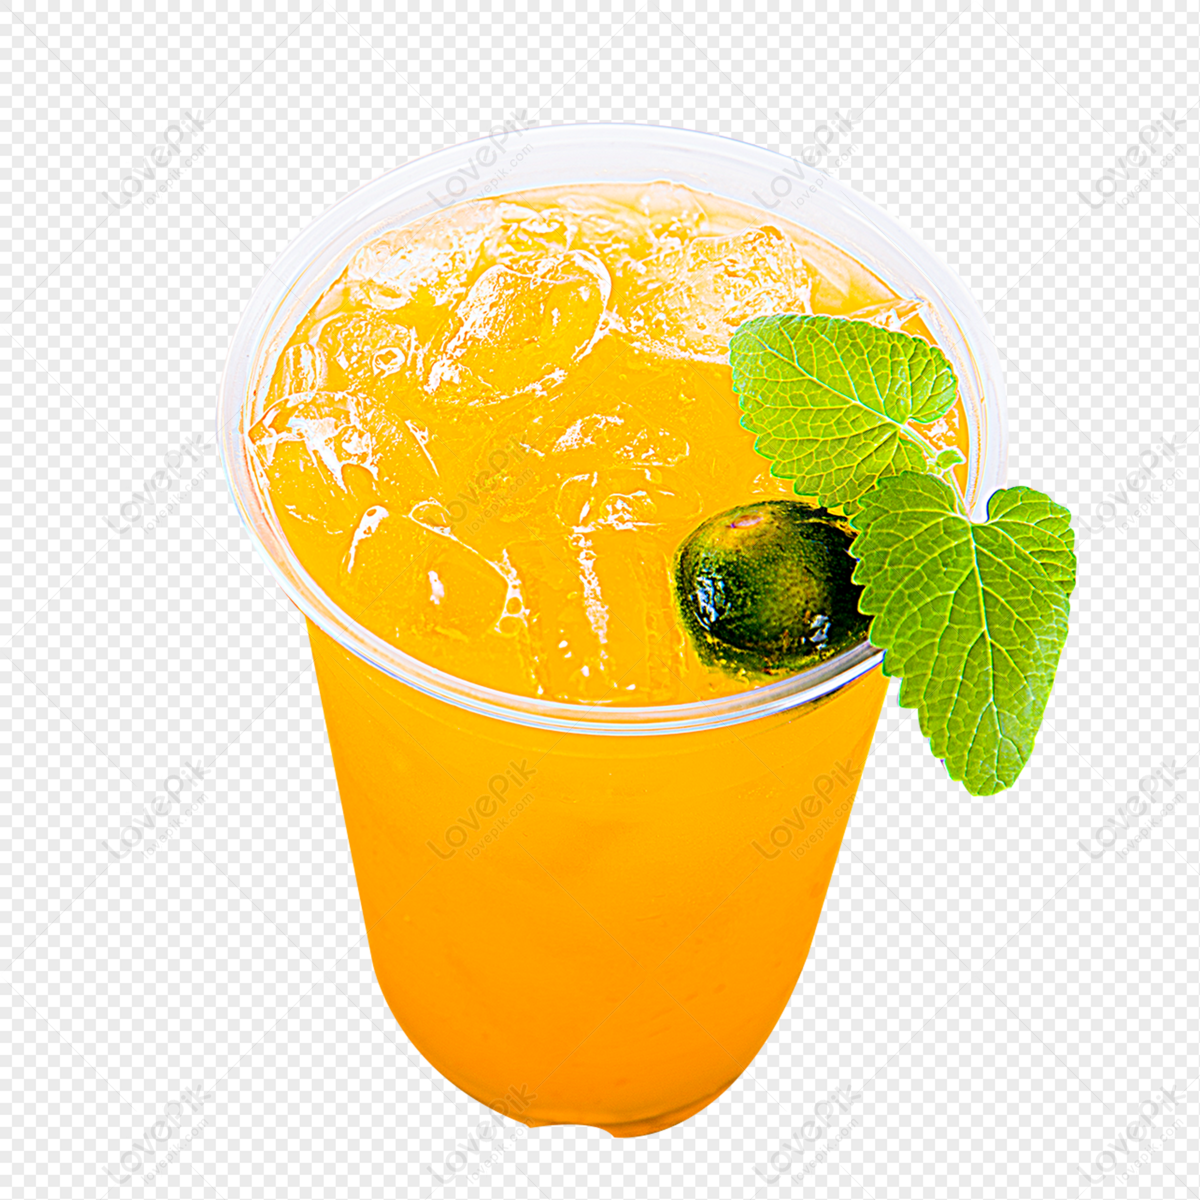 Mango Juice Drinks PNG White Transparent And Clipart Image For Free  Download - Lovepik | 401730672